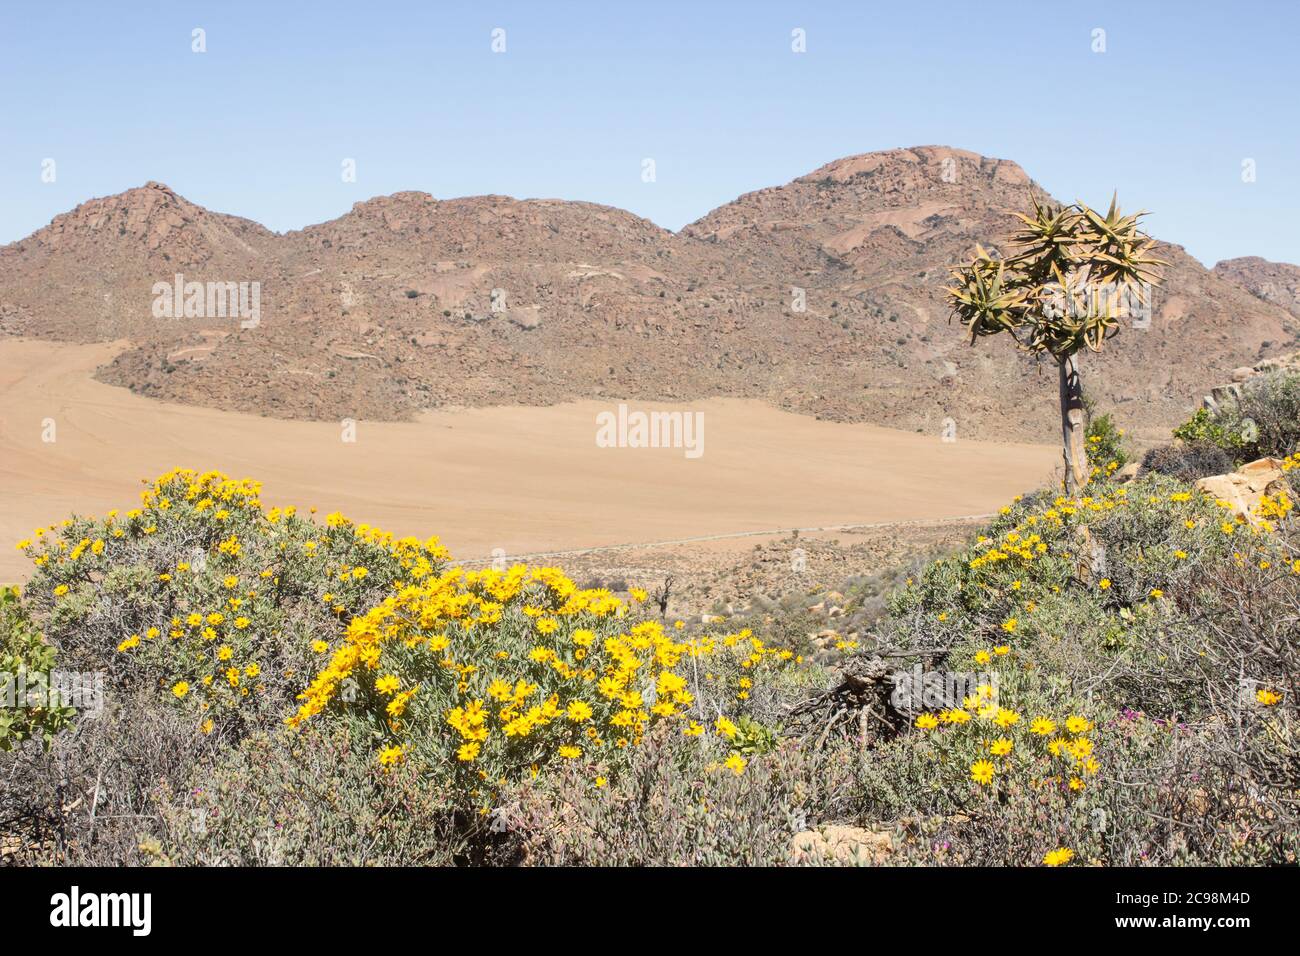 Skaapbos schrubs (Tripteris Oppositifolia) in full bloom, with the desolate, arid, Karoo-succulent, landscape in the Background Stock Photo